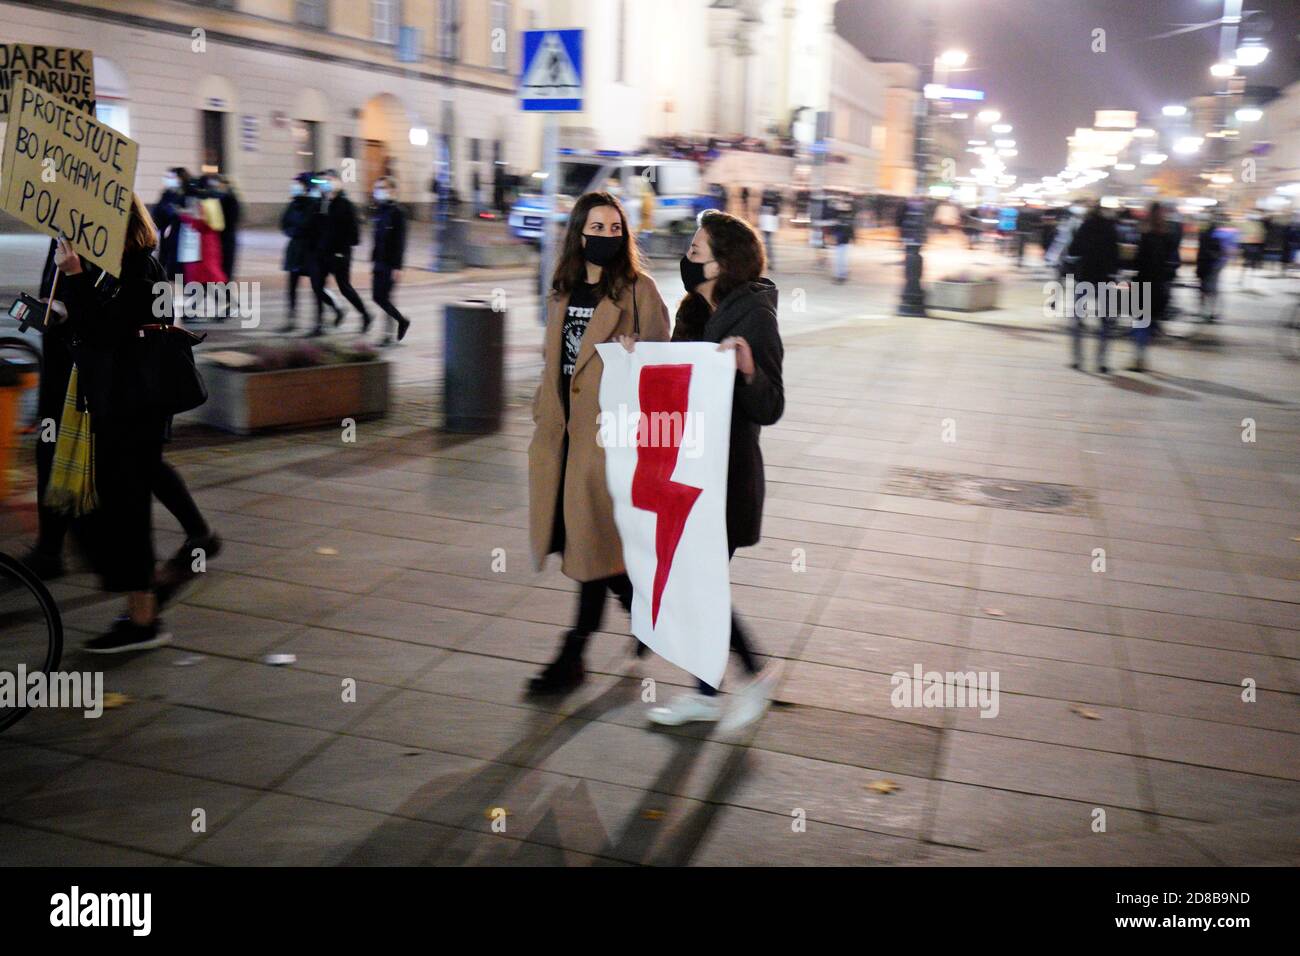 A woman carries a sign with a red lightning bolt, a symbol of the women's strike movement during a demonstration in Warsaw, Poland on October 28, 2020. In reaction to last week's ruling by the Constitutional Tribunal banning resulting in a near-total ban on abortions in Poland women across the country have been called to go on strike on Wednesday. Today's strike marks the 7th consecutive day of pro-choice protests against the right-wing, Law and Justice controlled government with it's close ties to the Catholic church. Poland's de facto leader and head of the Law and Justice party Jaroslaw Kac Stock Photo